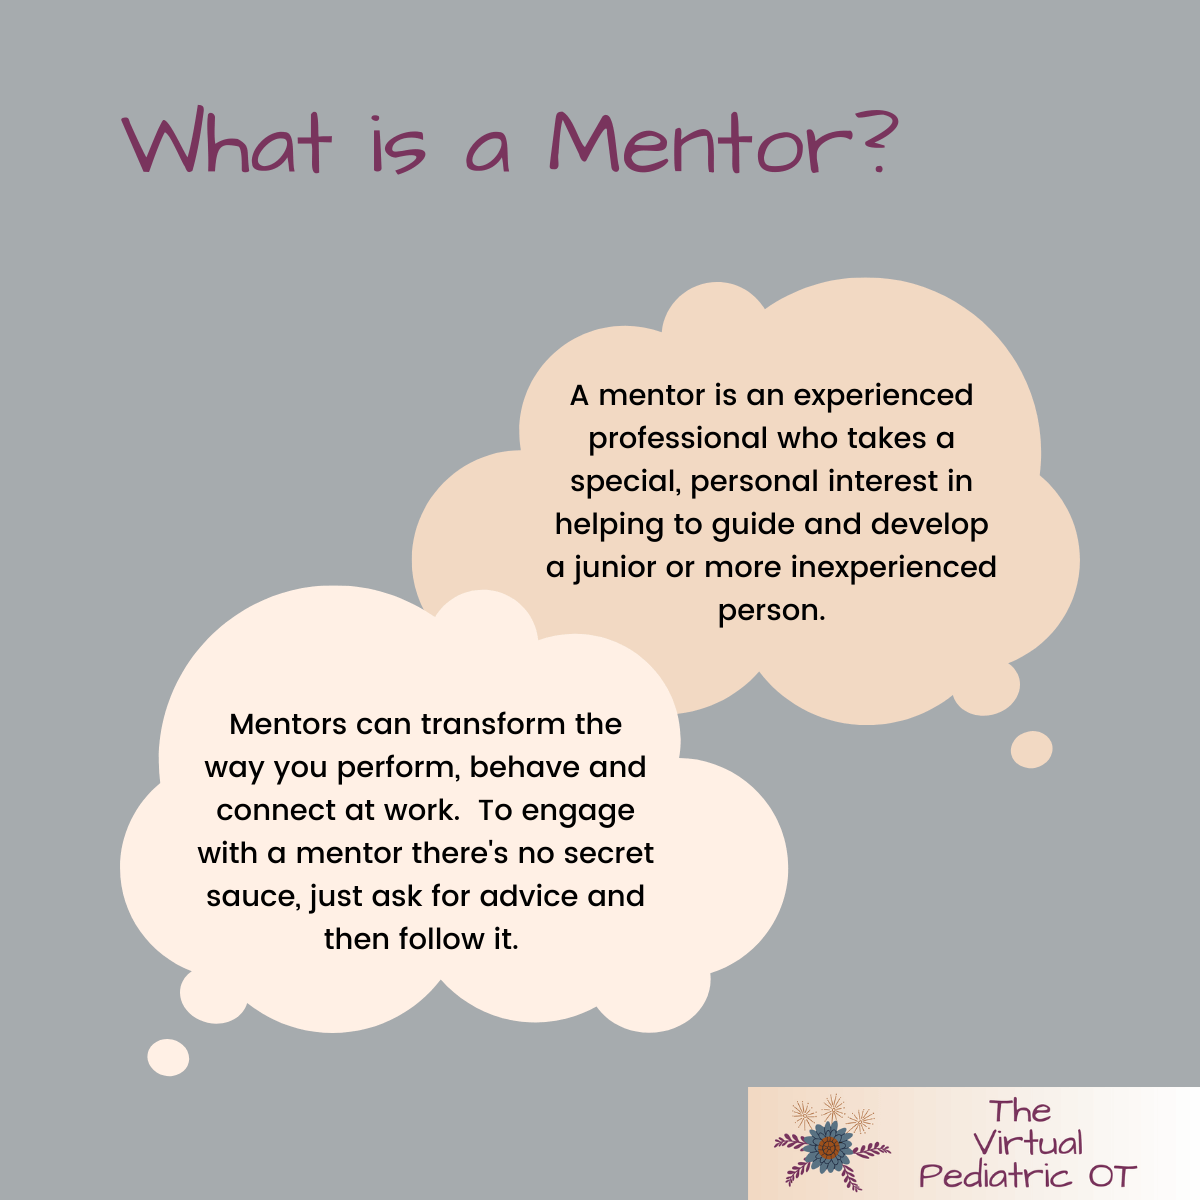 What is a Mentor?